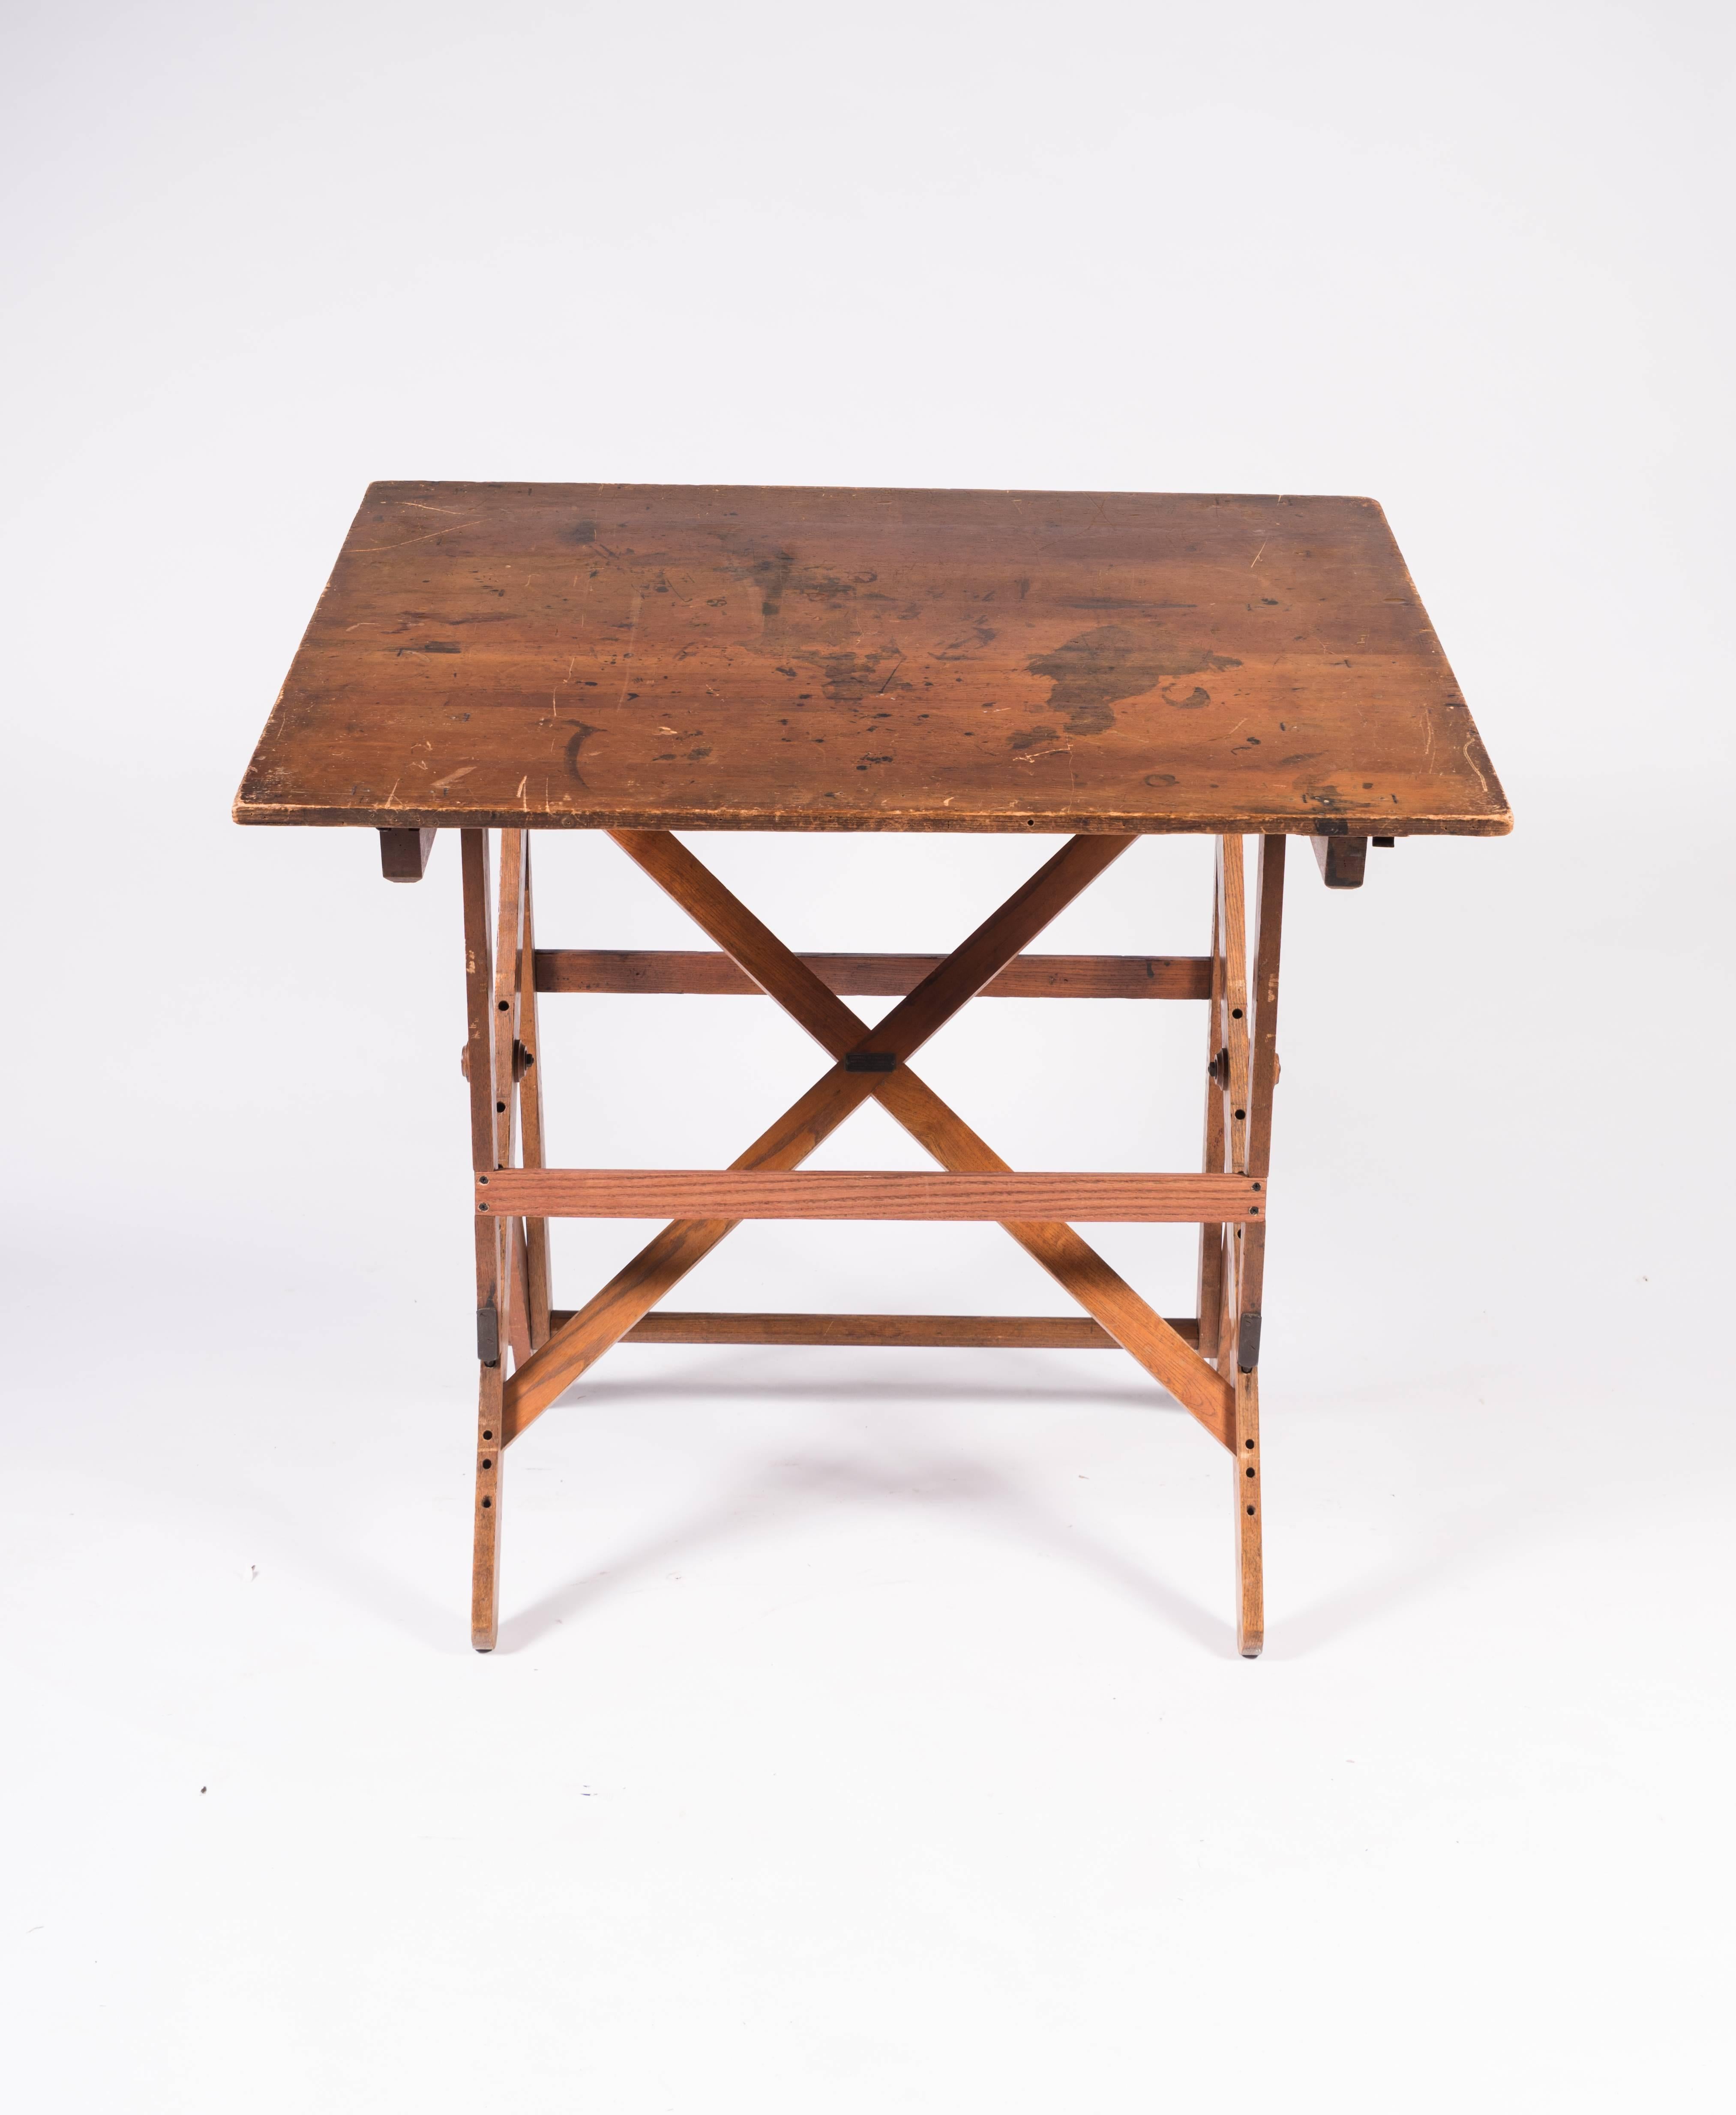 From Keuffel and Esser, America's first drafting table manufacturer, a vintage drafting table that tells the story of its past and its intentions for the future on its beautifully worn and ink stained work surface. Sturdy and solid, it adjusts from